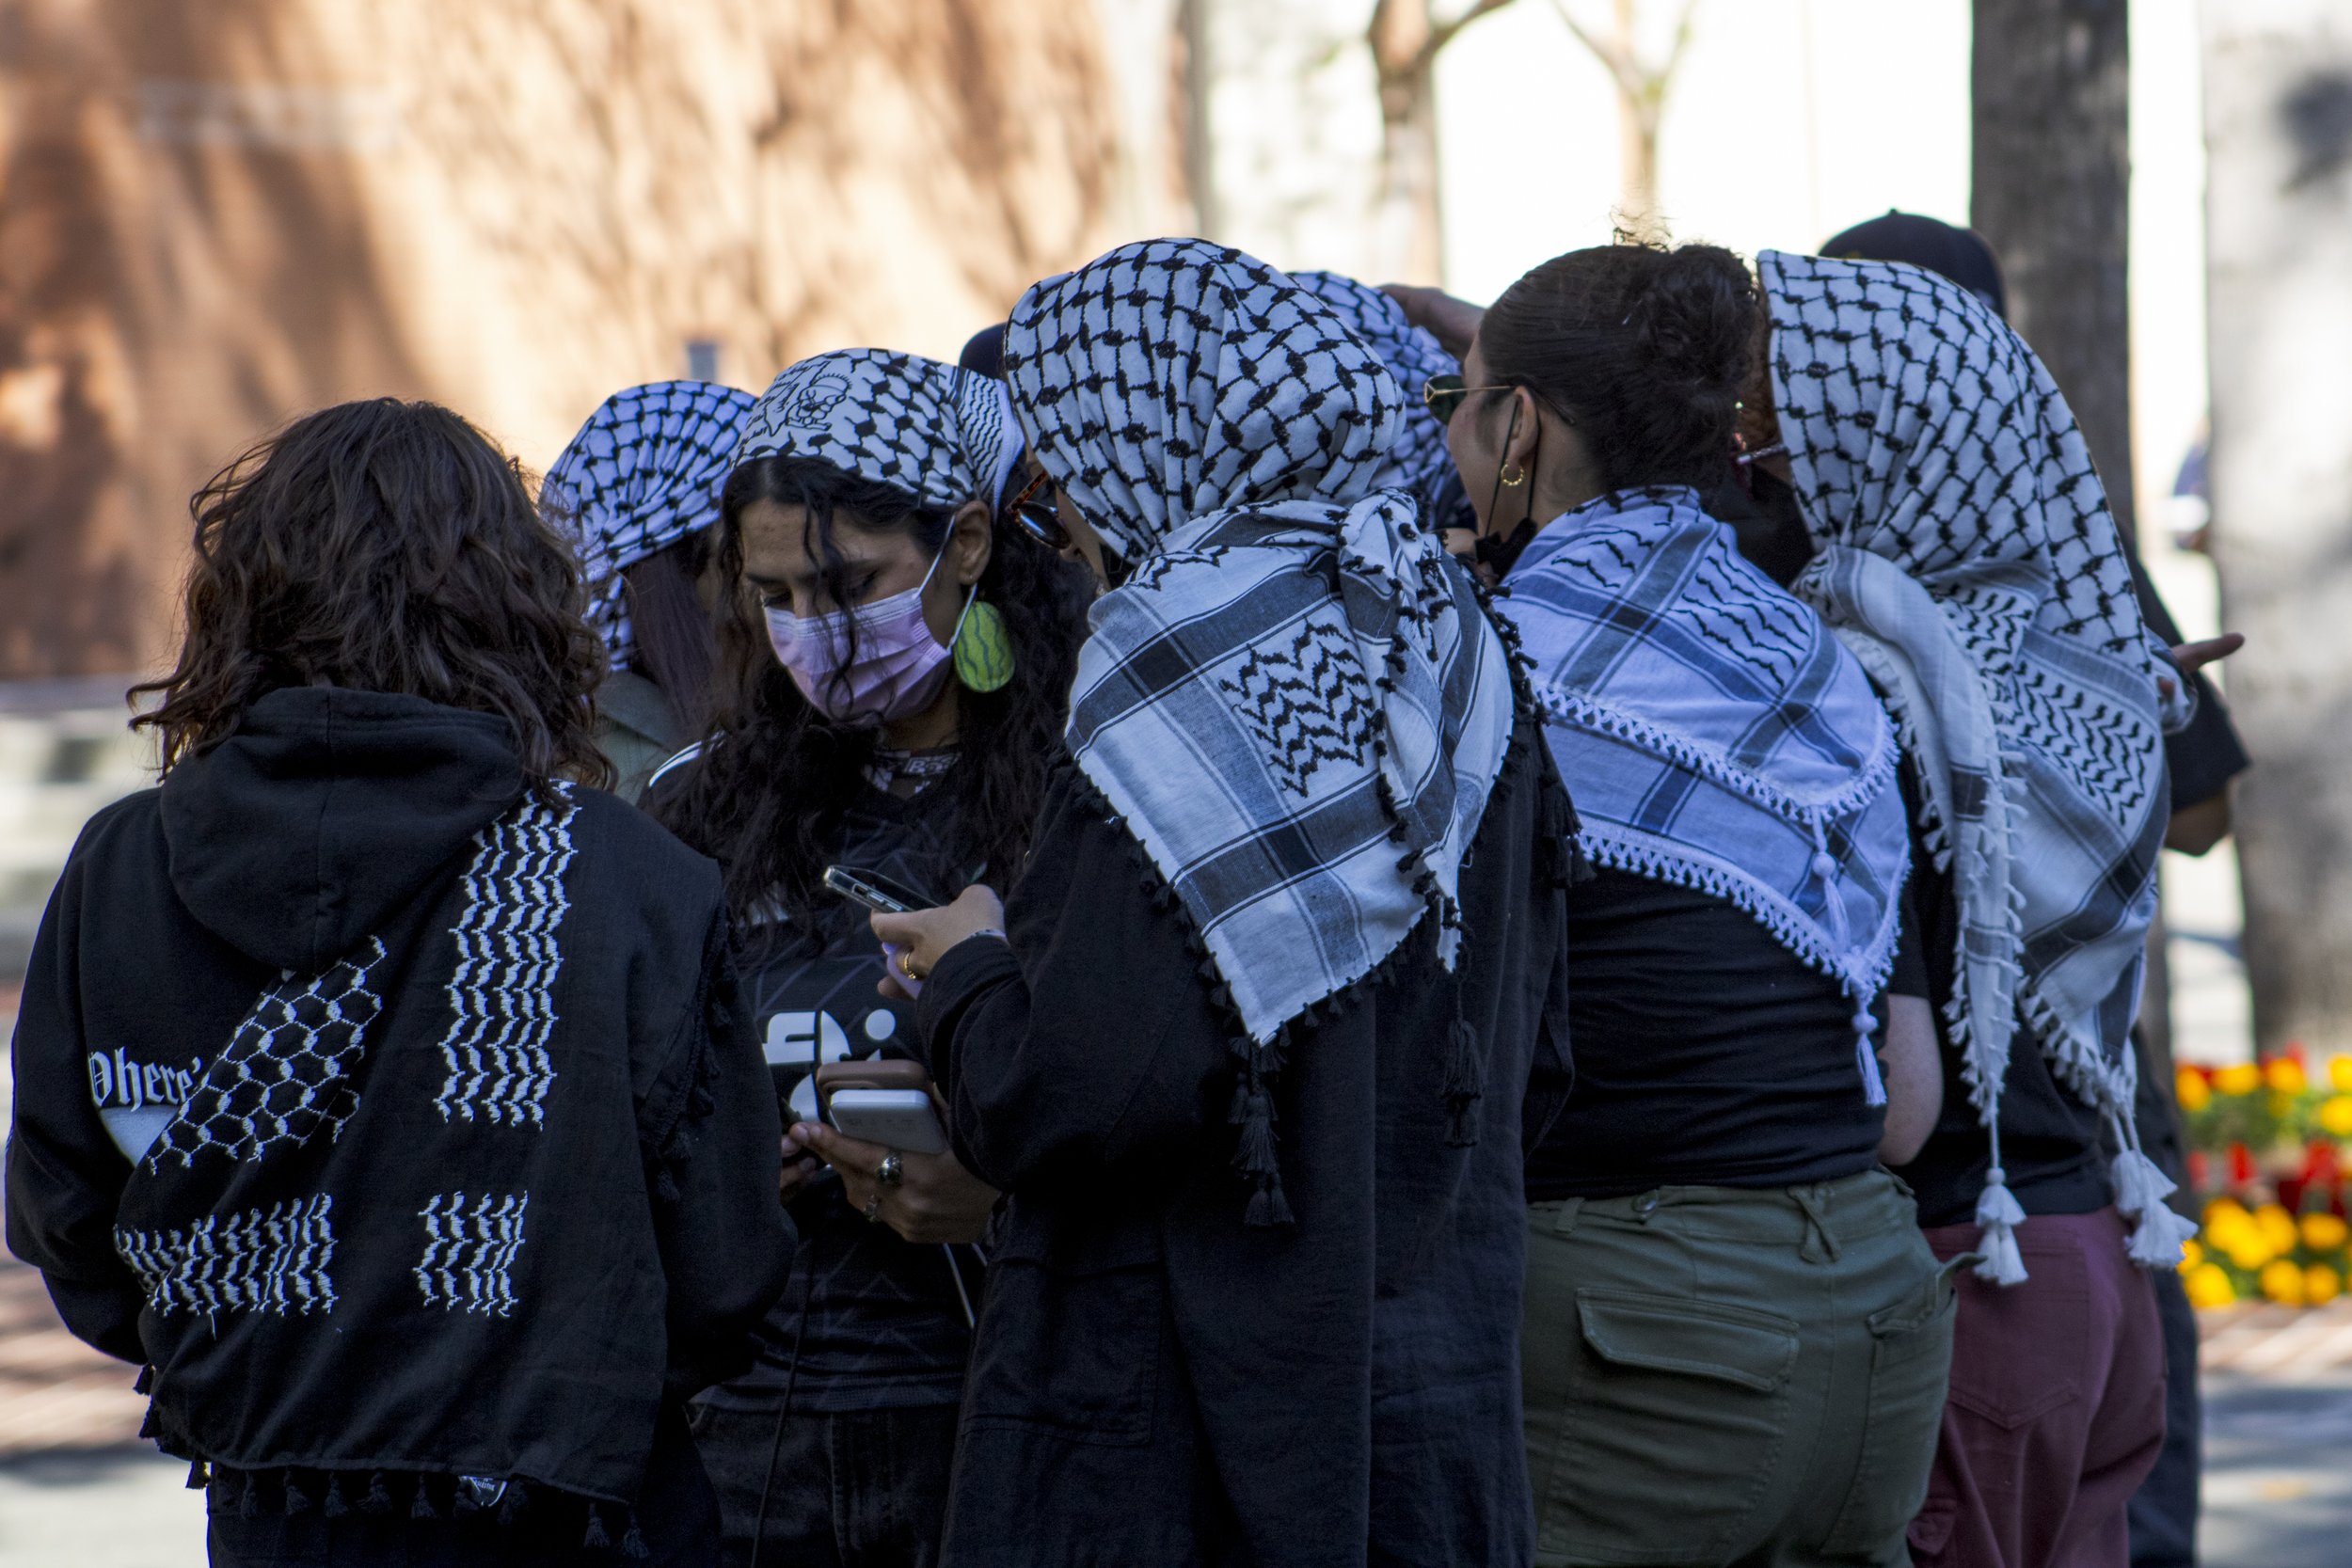  Members of the Divest from Death University of Southern California activist group wear matching Keffiyeh, a Middle Eastern headdress to protect their identities. Protesters have occupied, the EF Hutton Park on USC campus in Los Angeles California, o